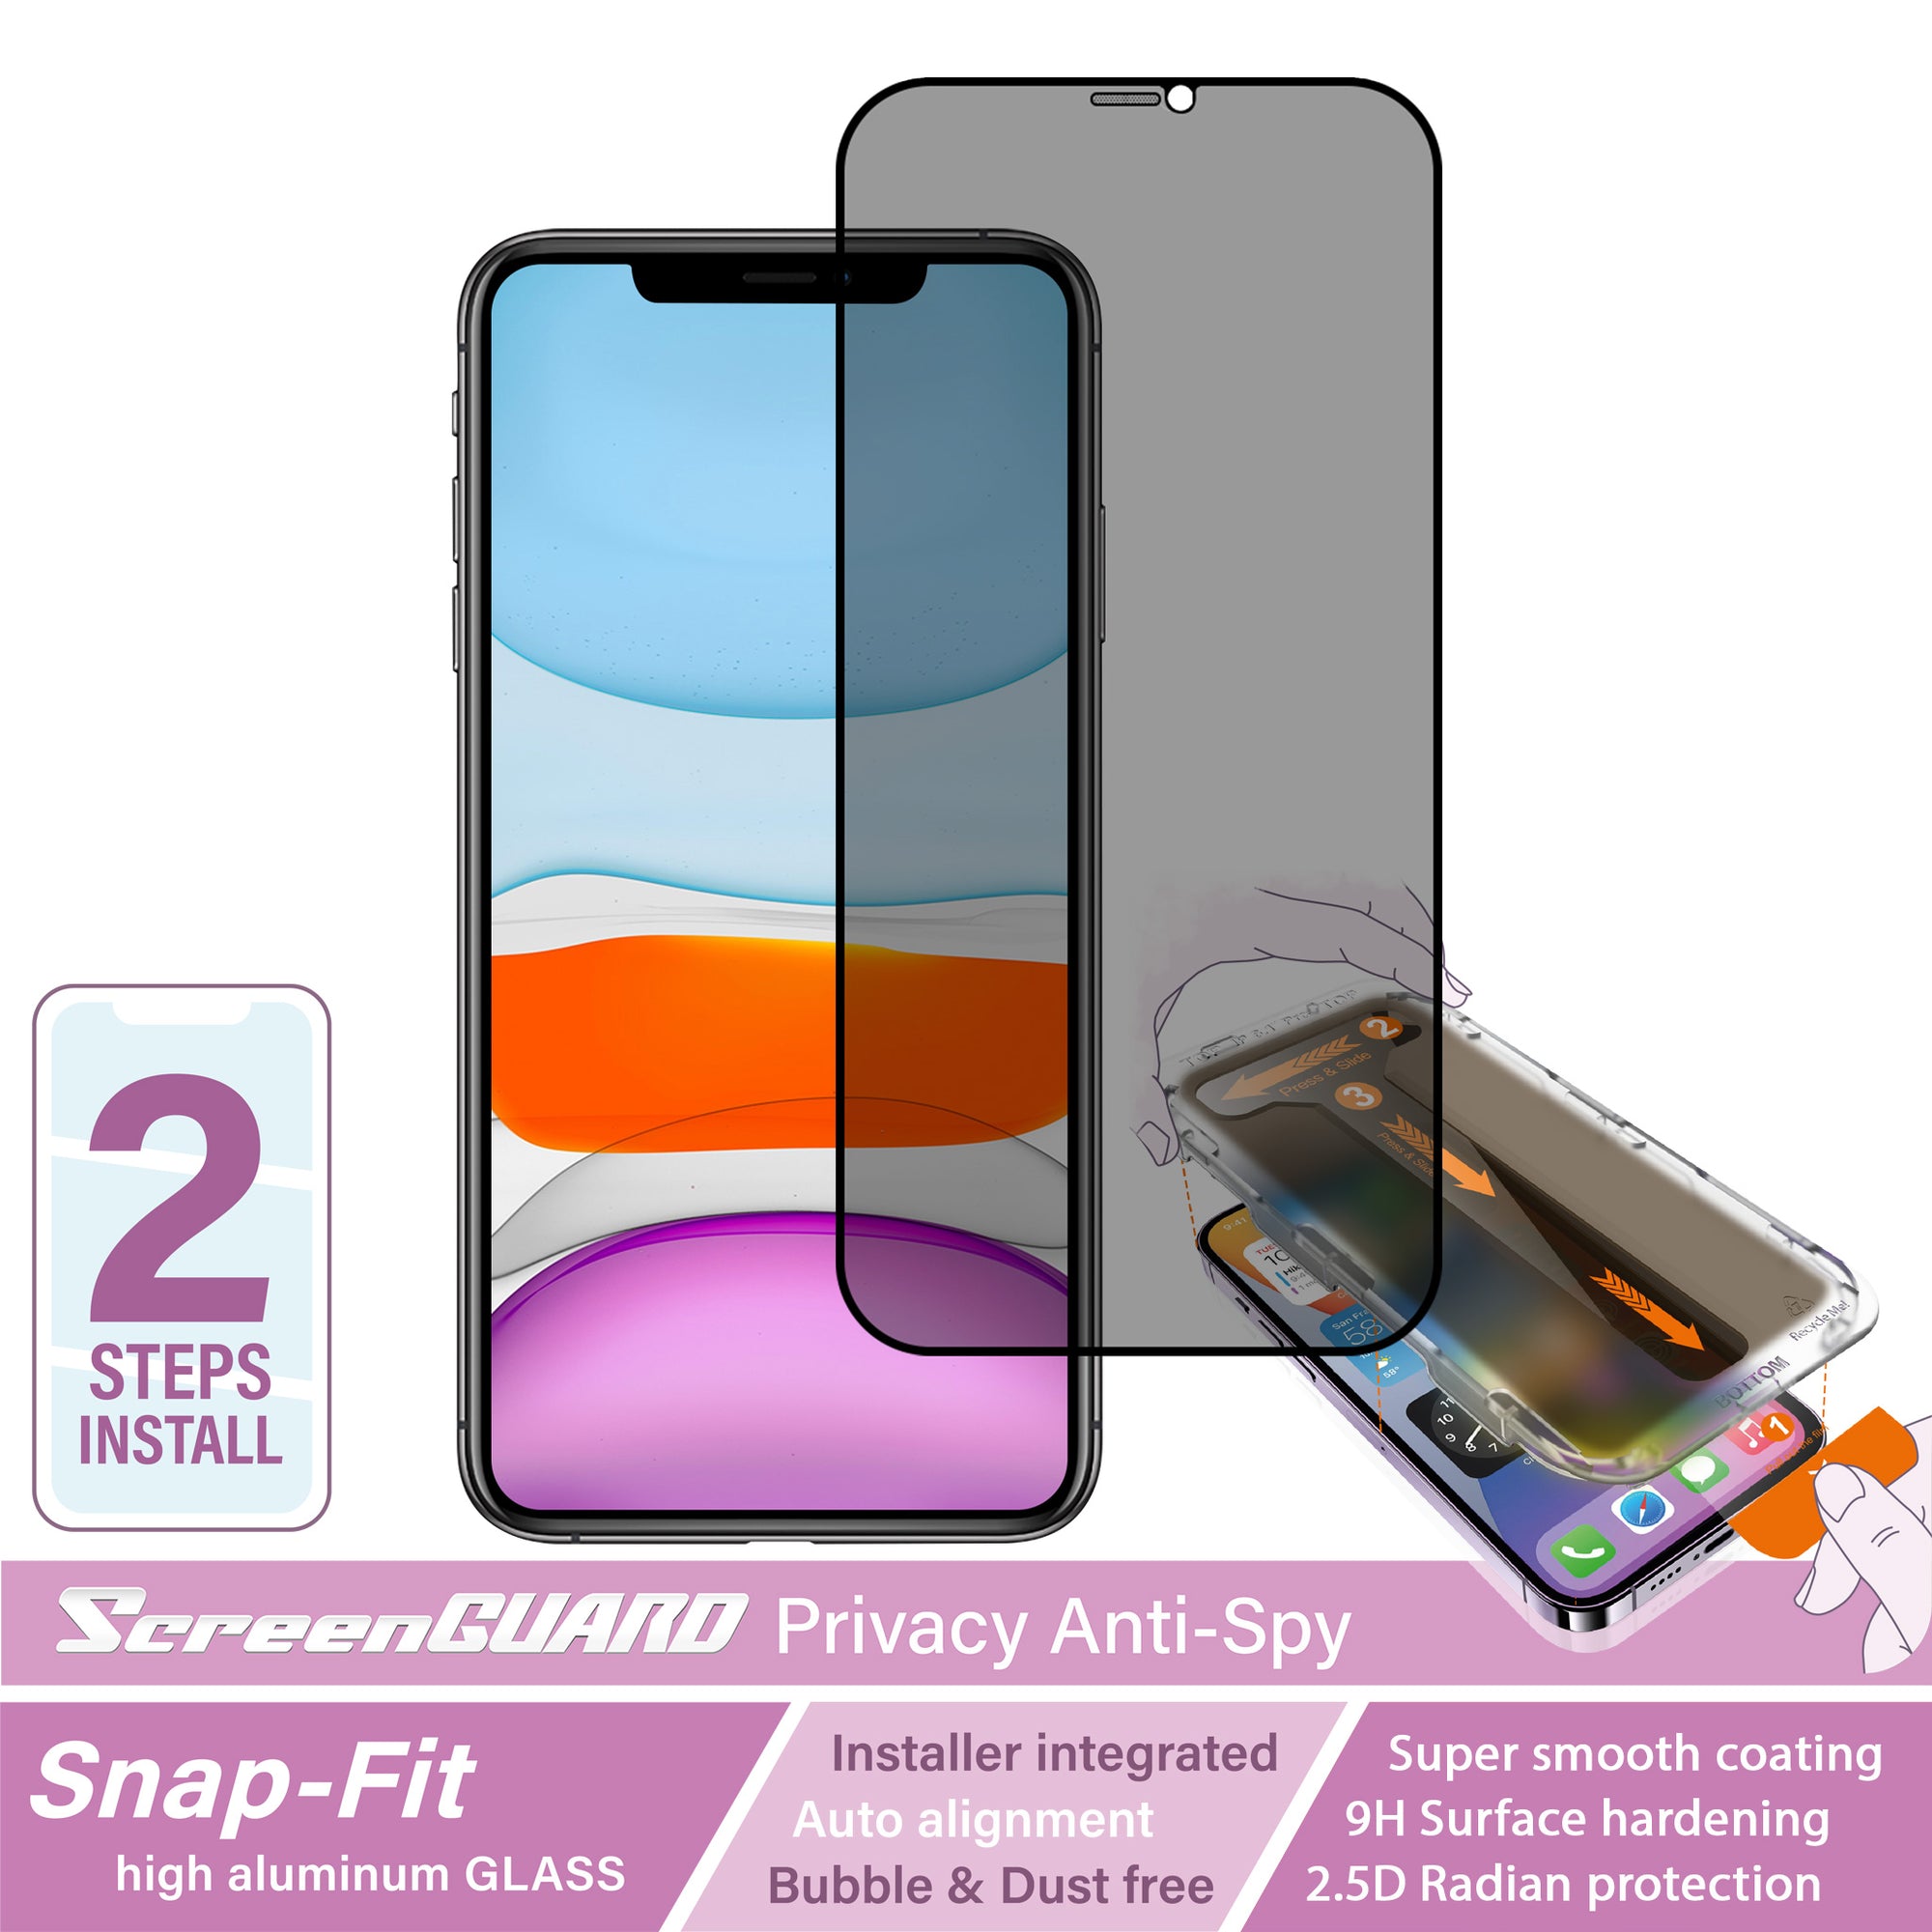 iPhone 11 & XR SnapFit High Aluminum Glass Privacy Screen Protector